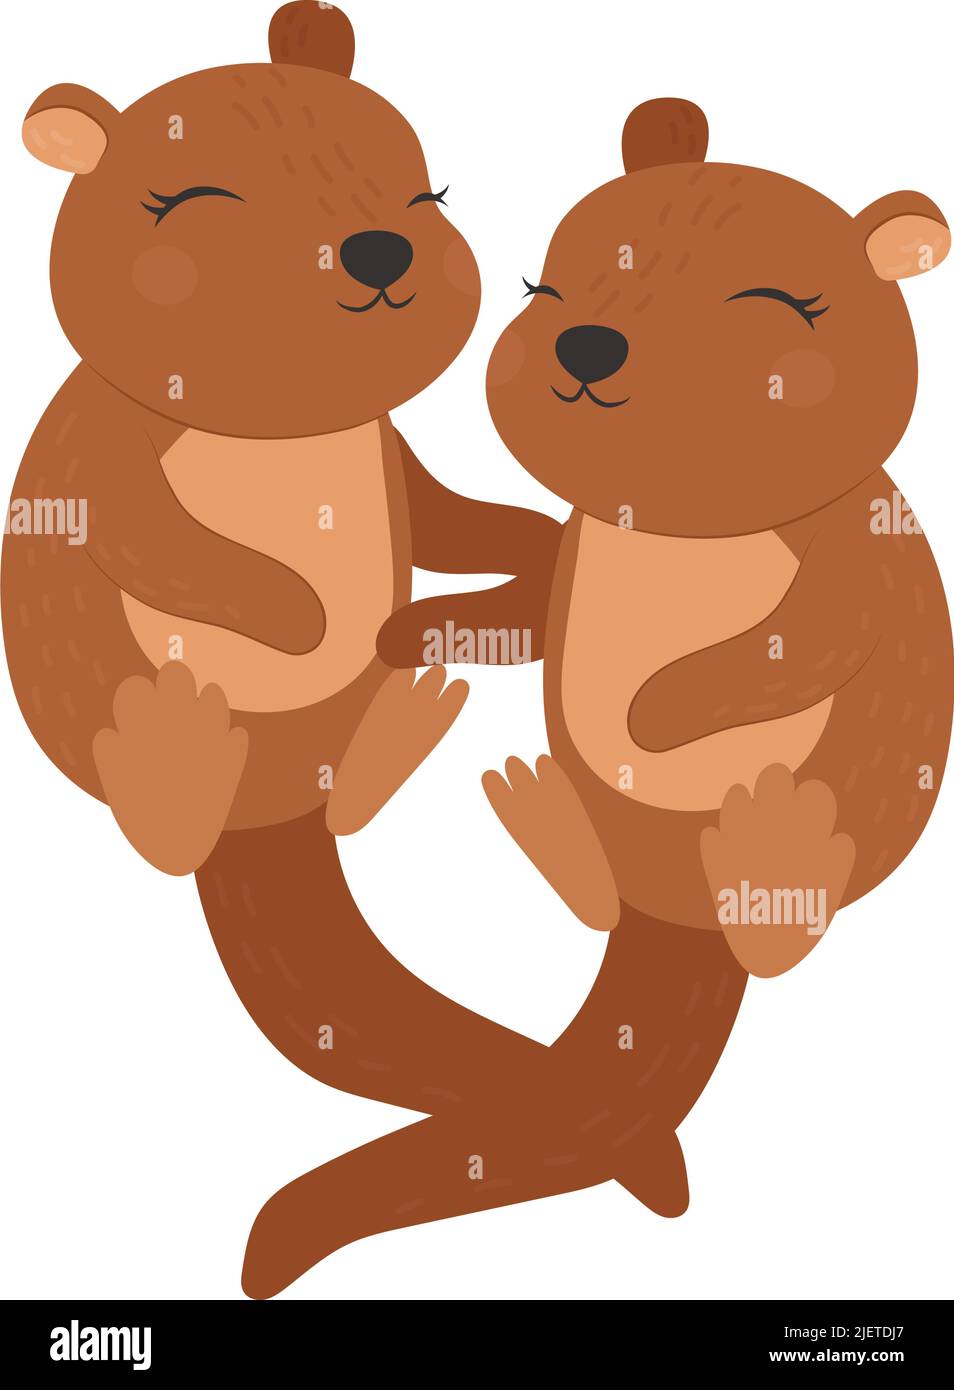 Cute Otter Clipart for Kids Holidays and Goods. Happy Clip Art Two Otters. Vector Illustration of an Animal for Stickers, Prints for Clothes, Baby Stock Vector